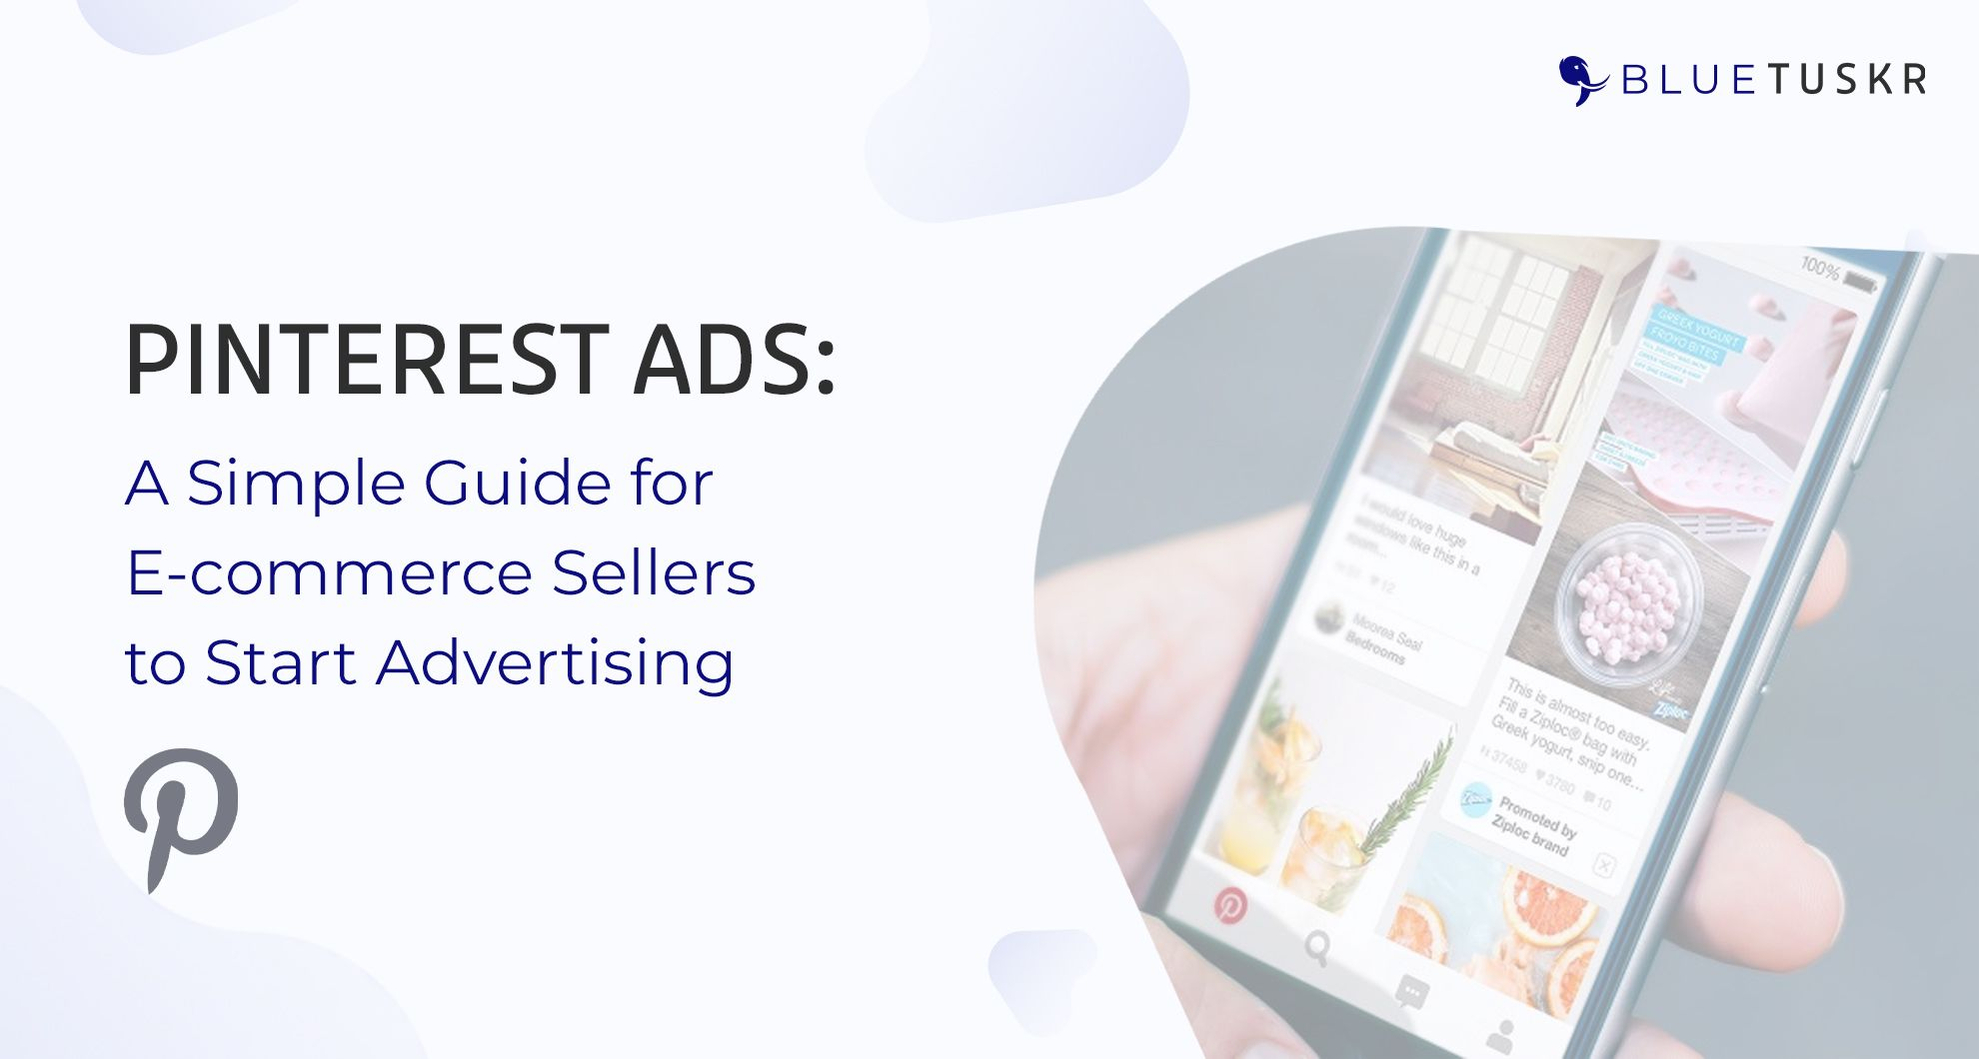 Pinterest Ads: A Simple Guide for E-commerce Sellers to Start Advertising